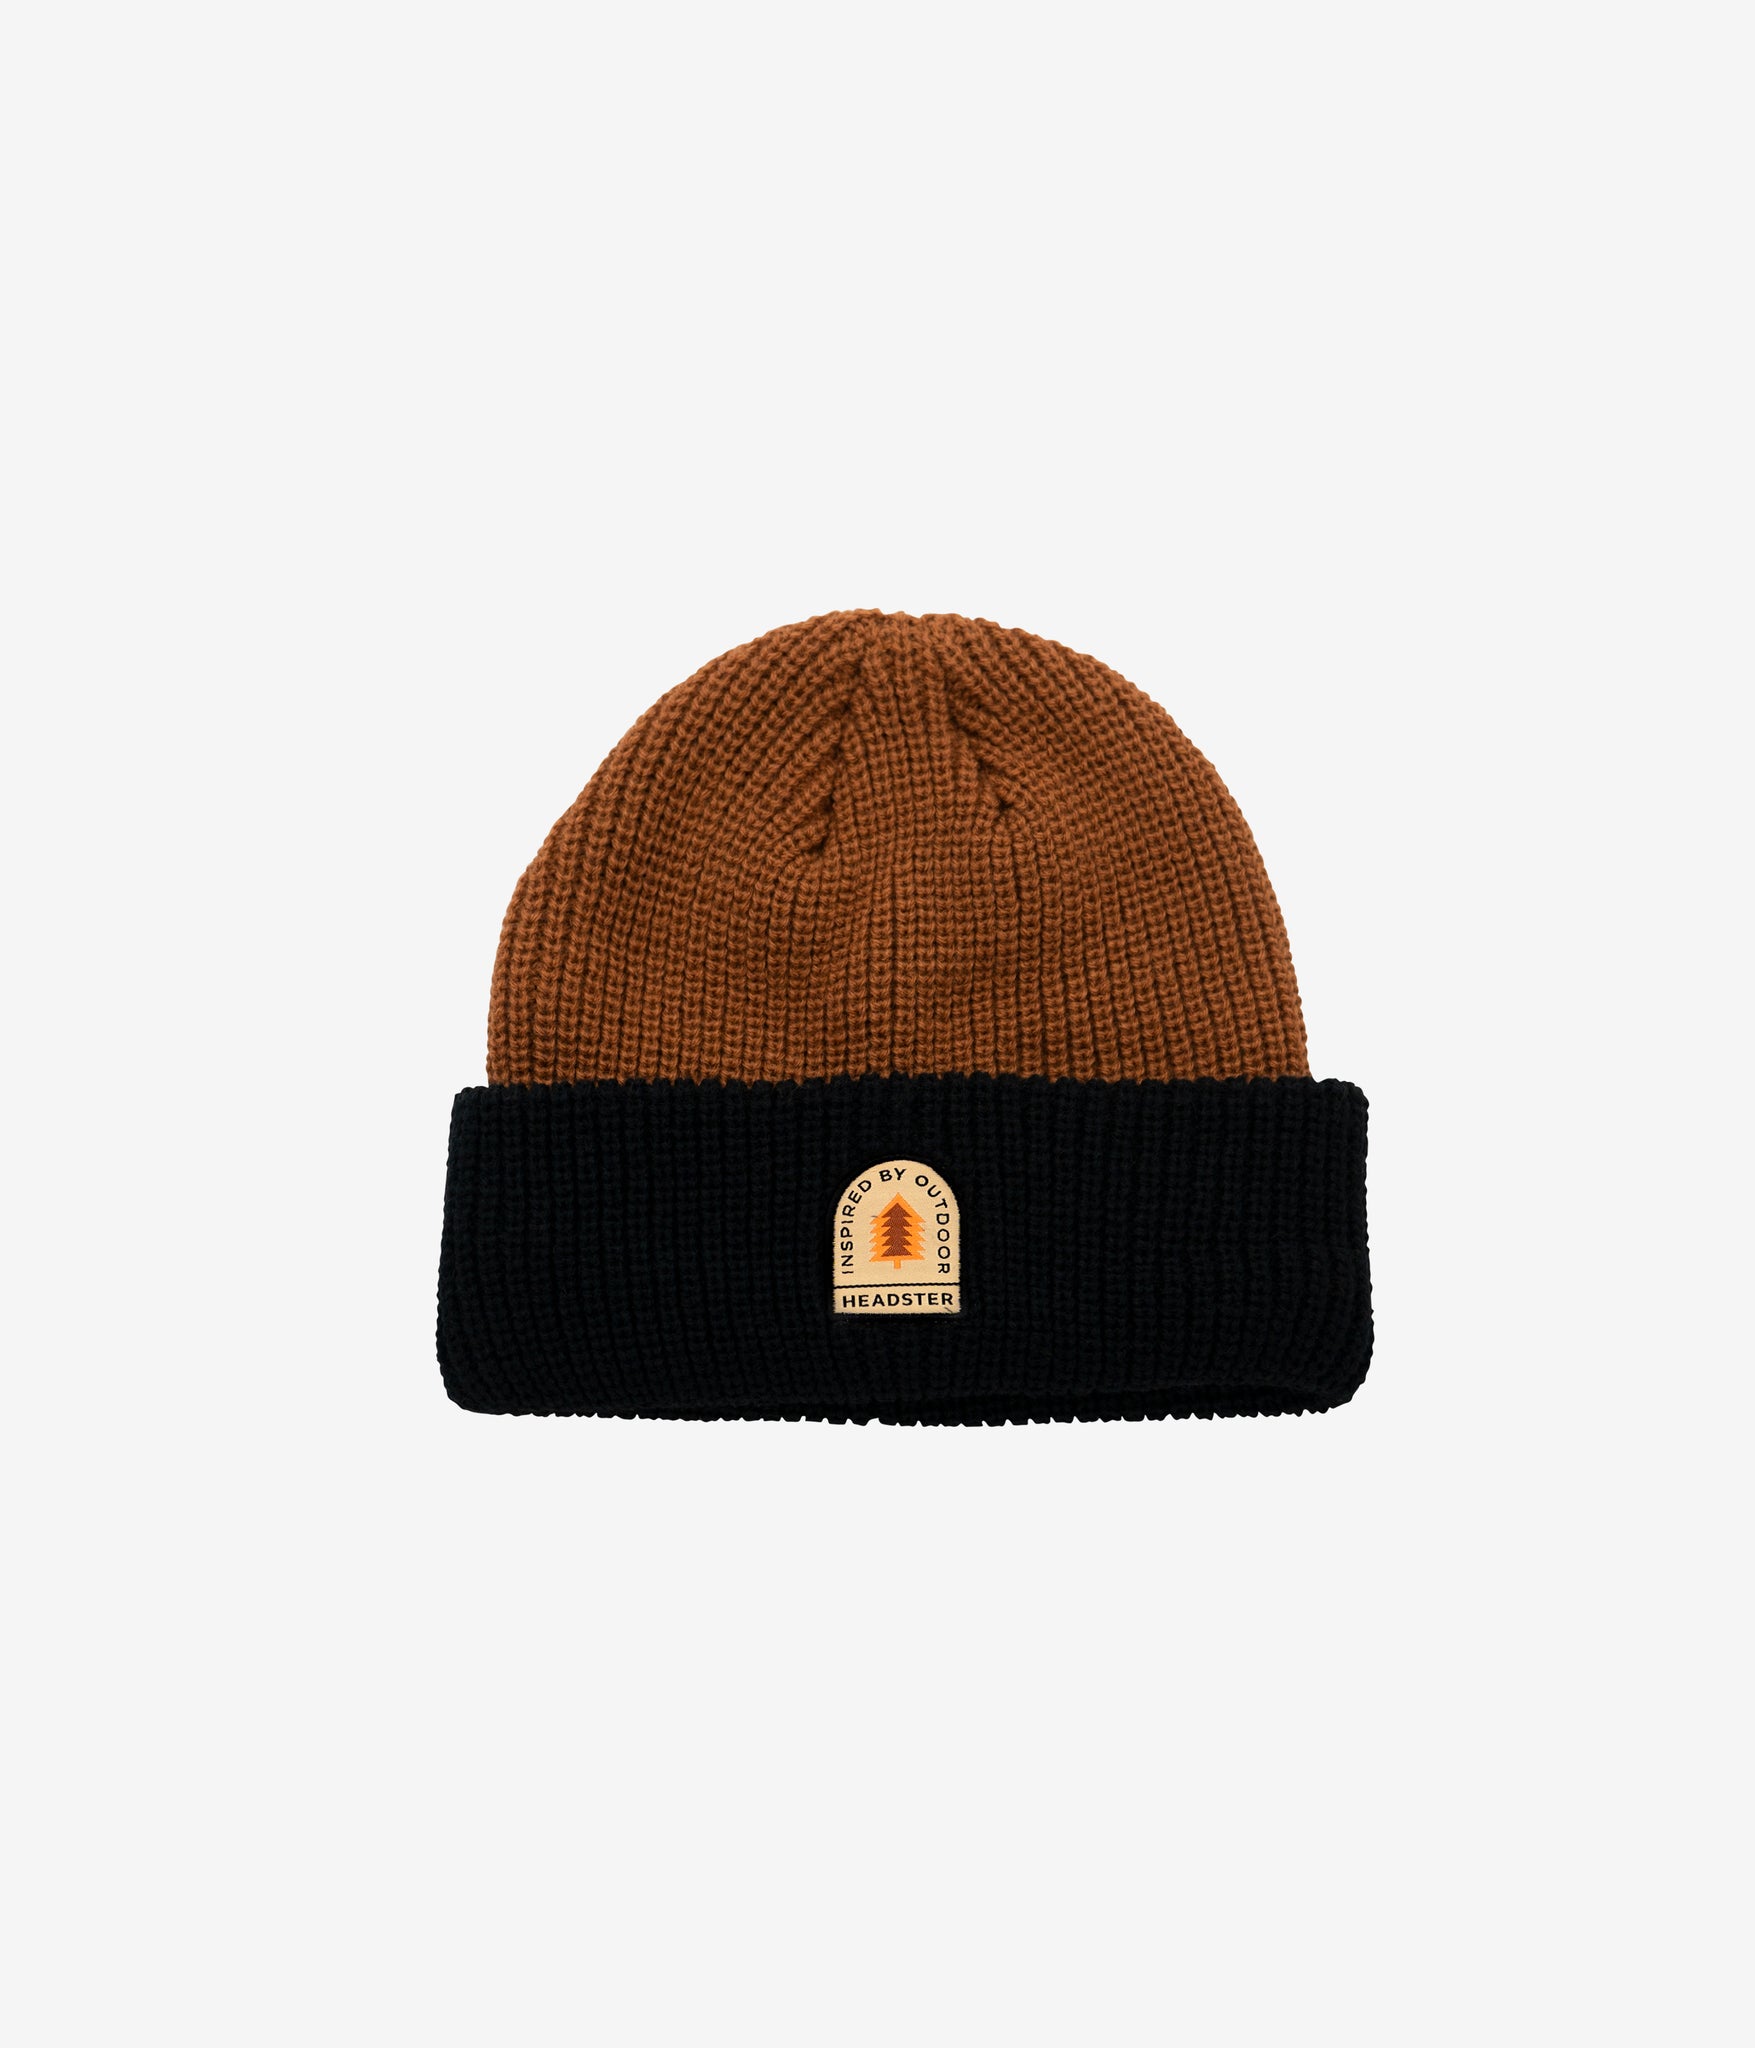 Two Fold outdoor beanie - black